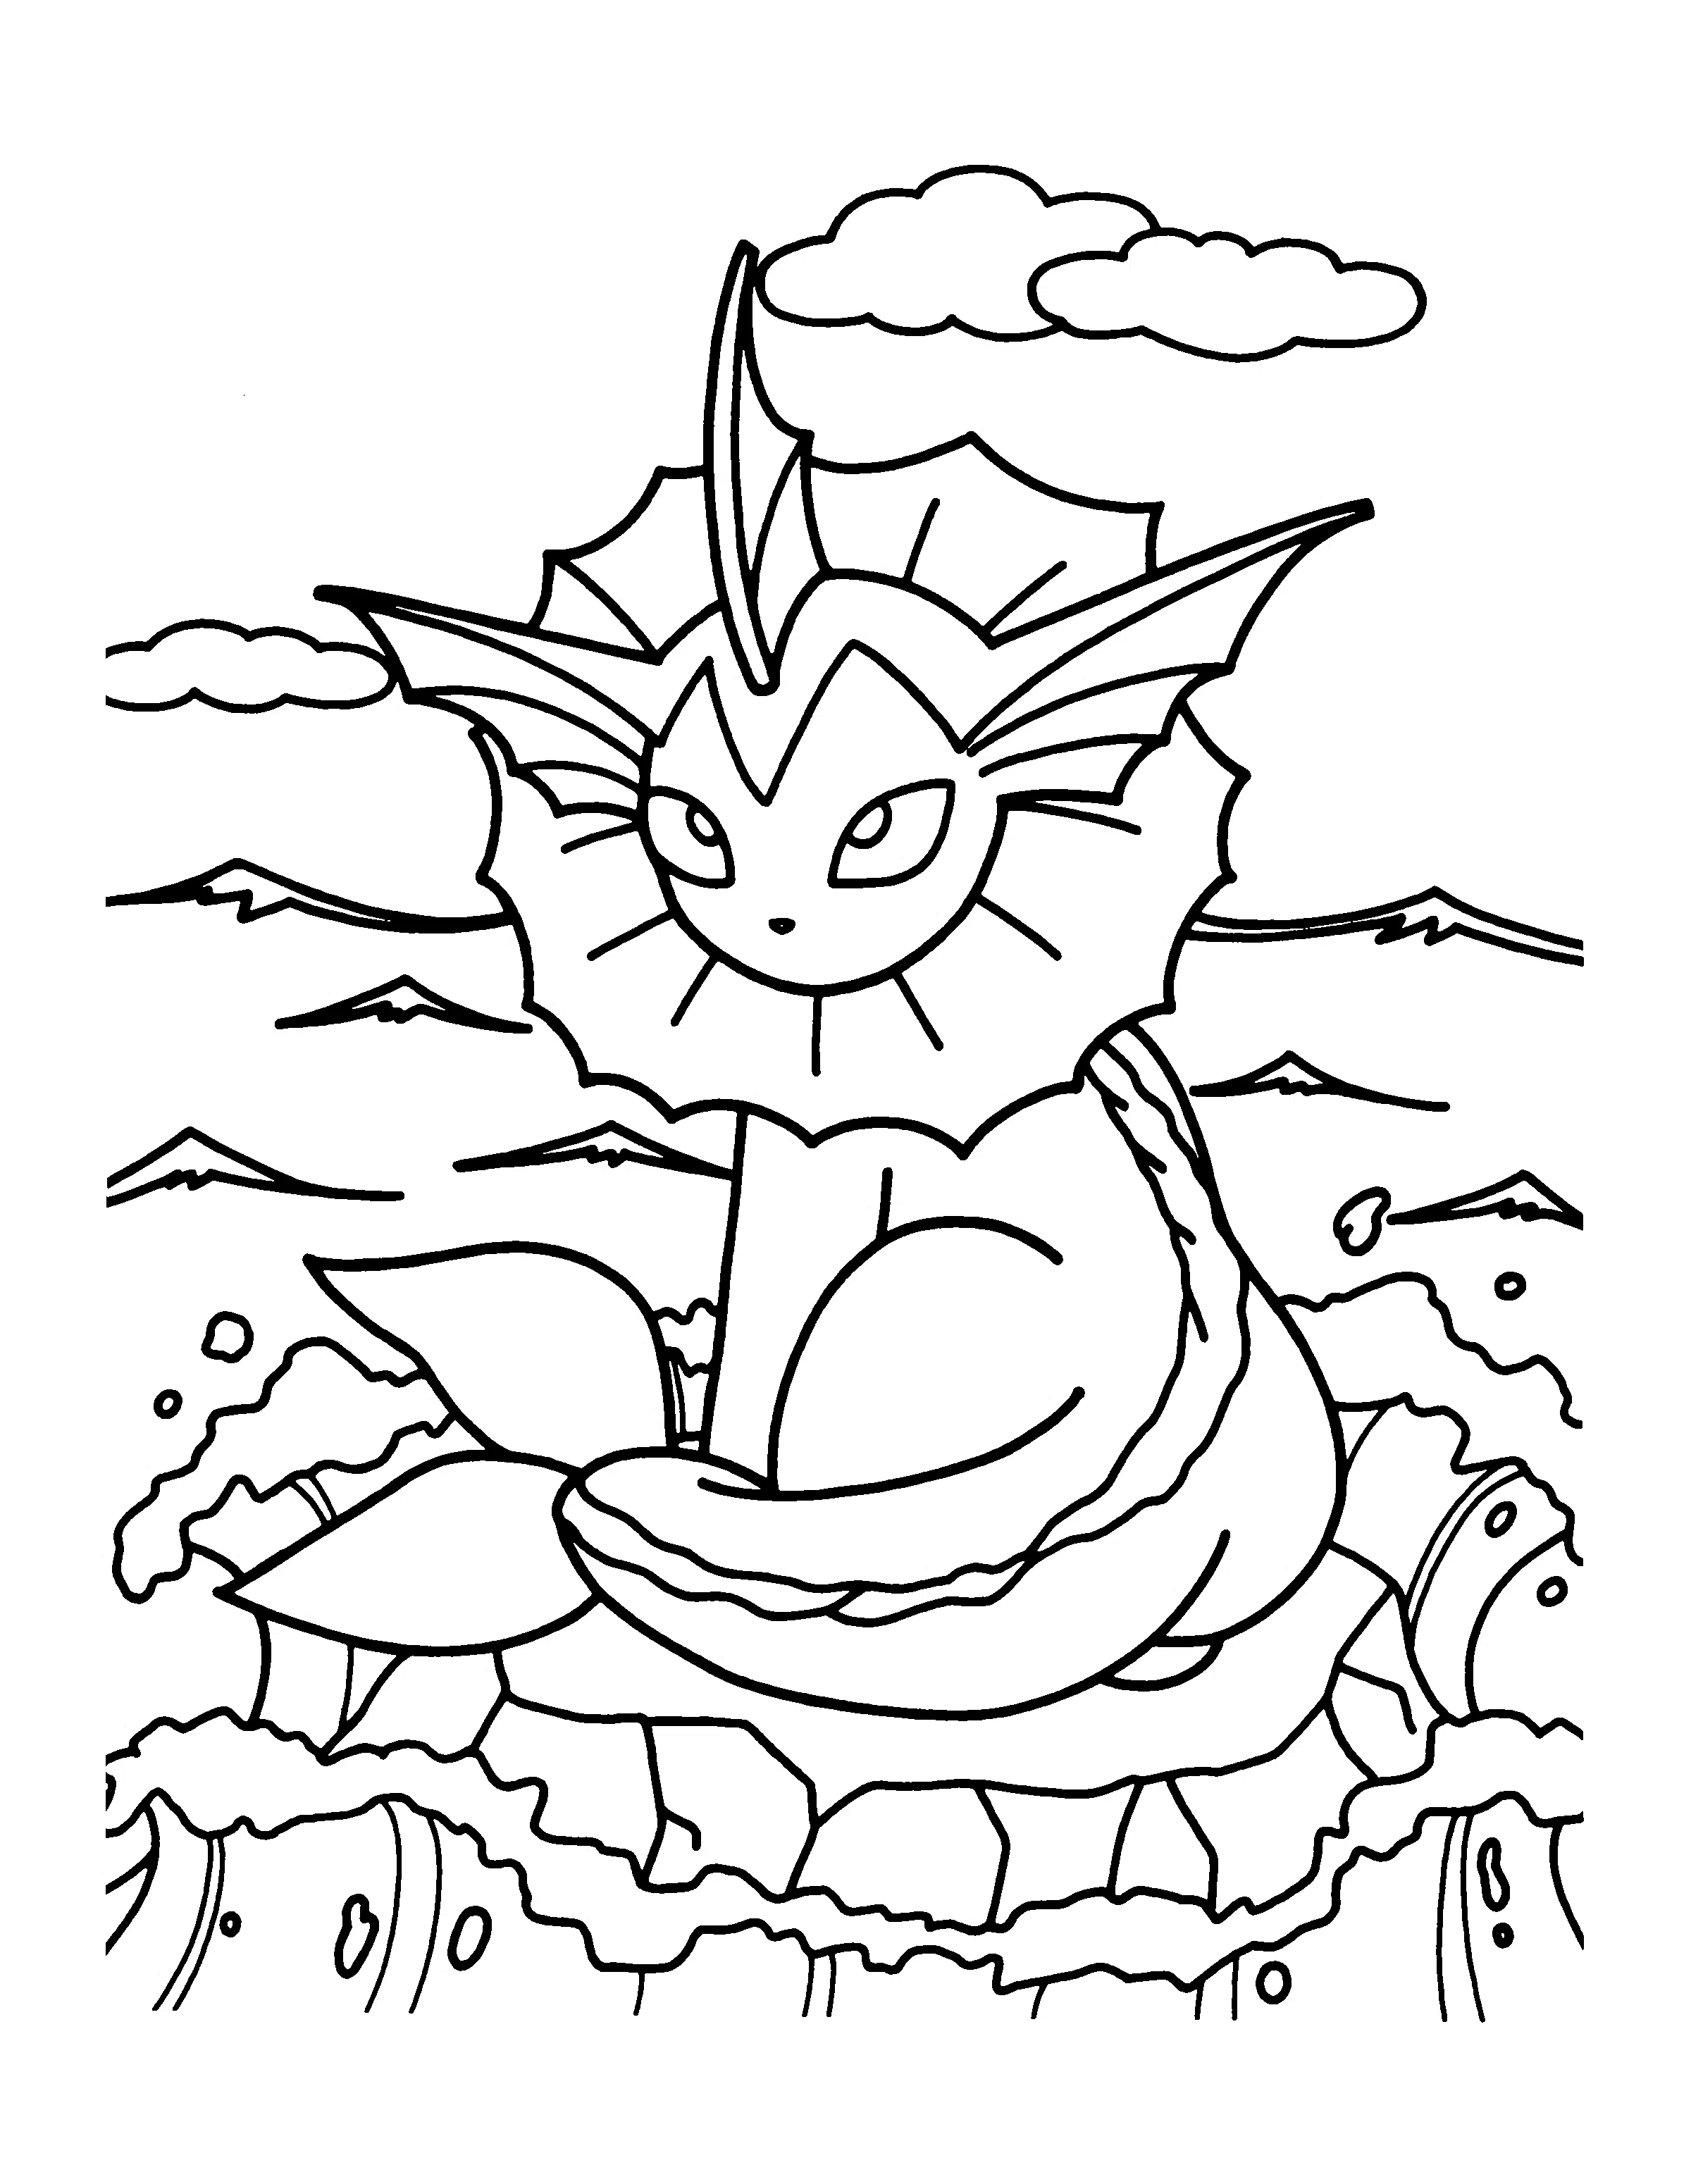 Top pokemon coloring pages for kids